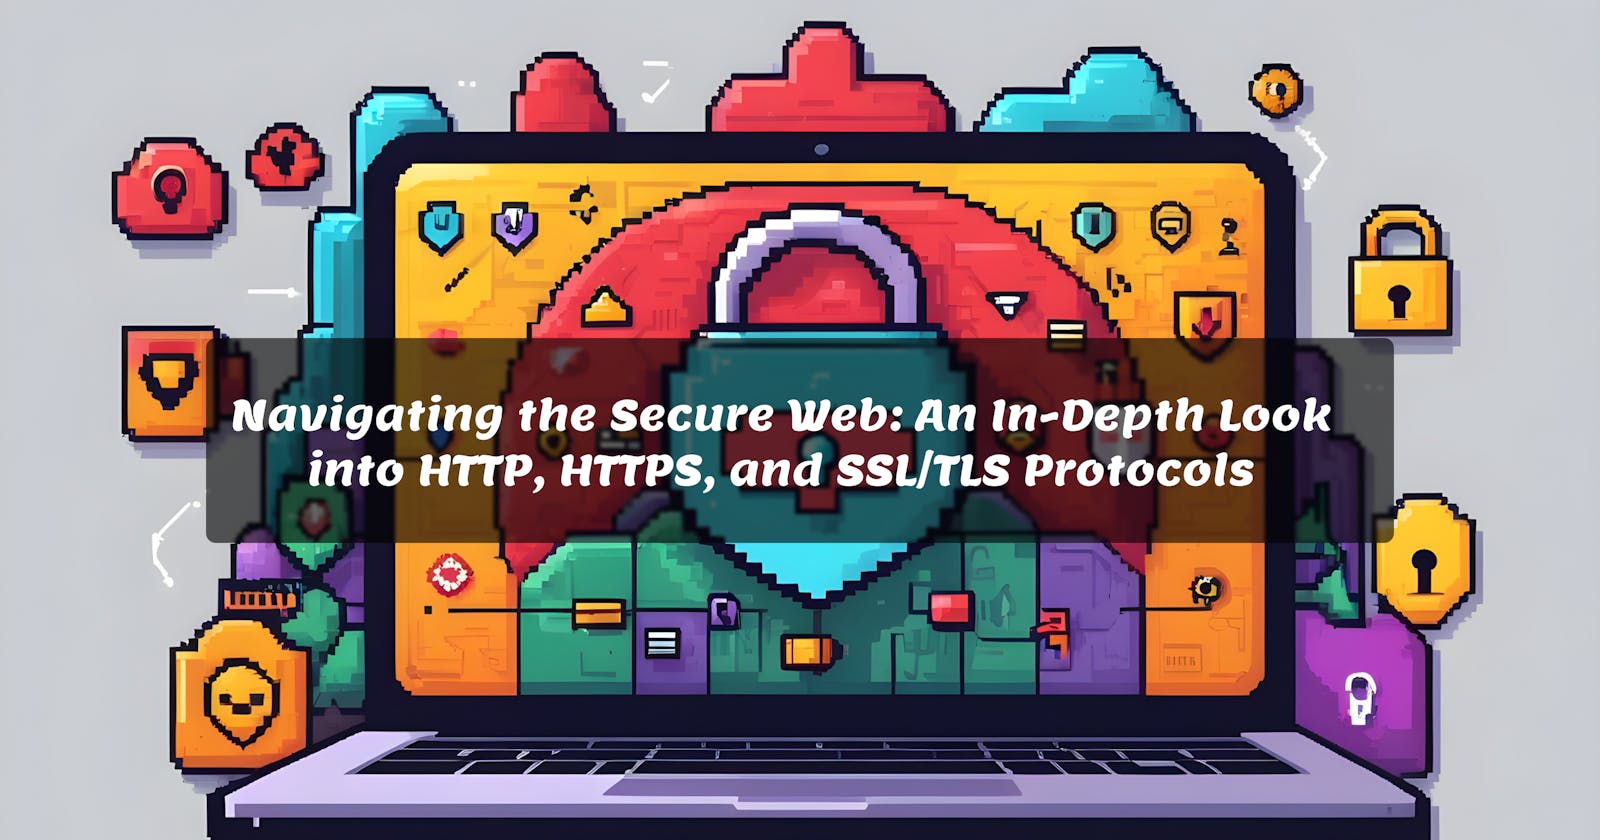 Navigating the Secure Web: An In-Depth Look into HTTP, HTTPS, and SSL/TLS Protocols